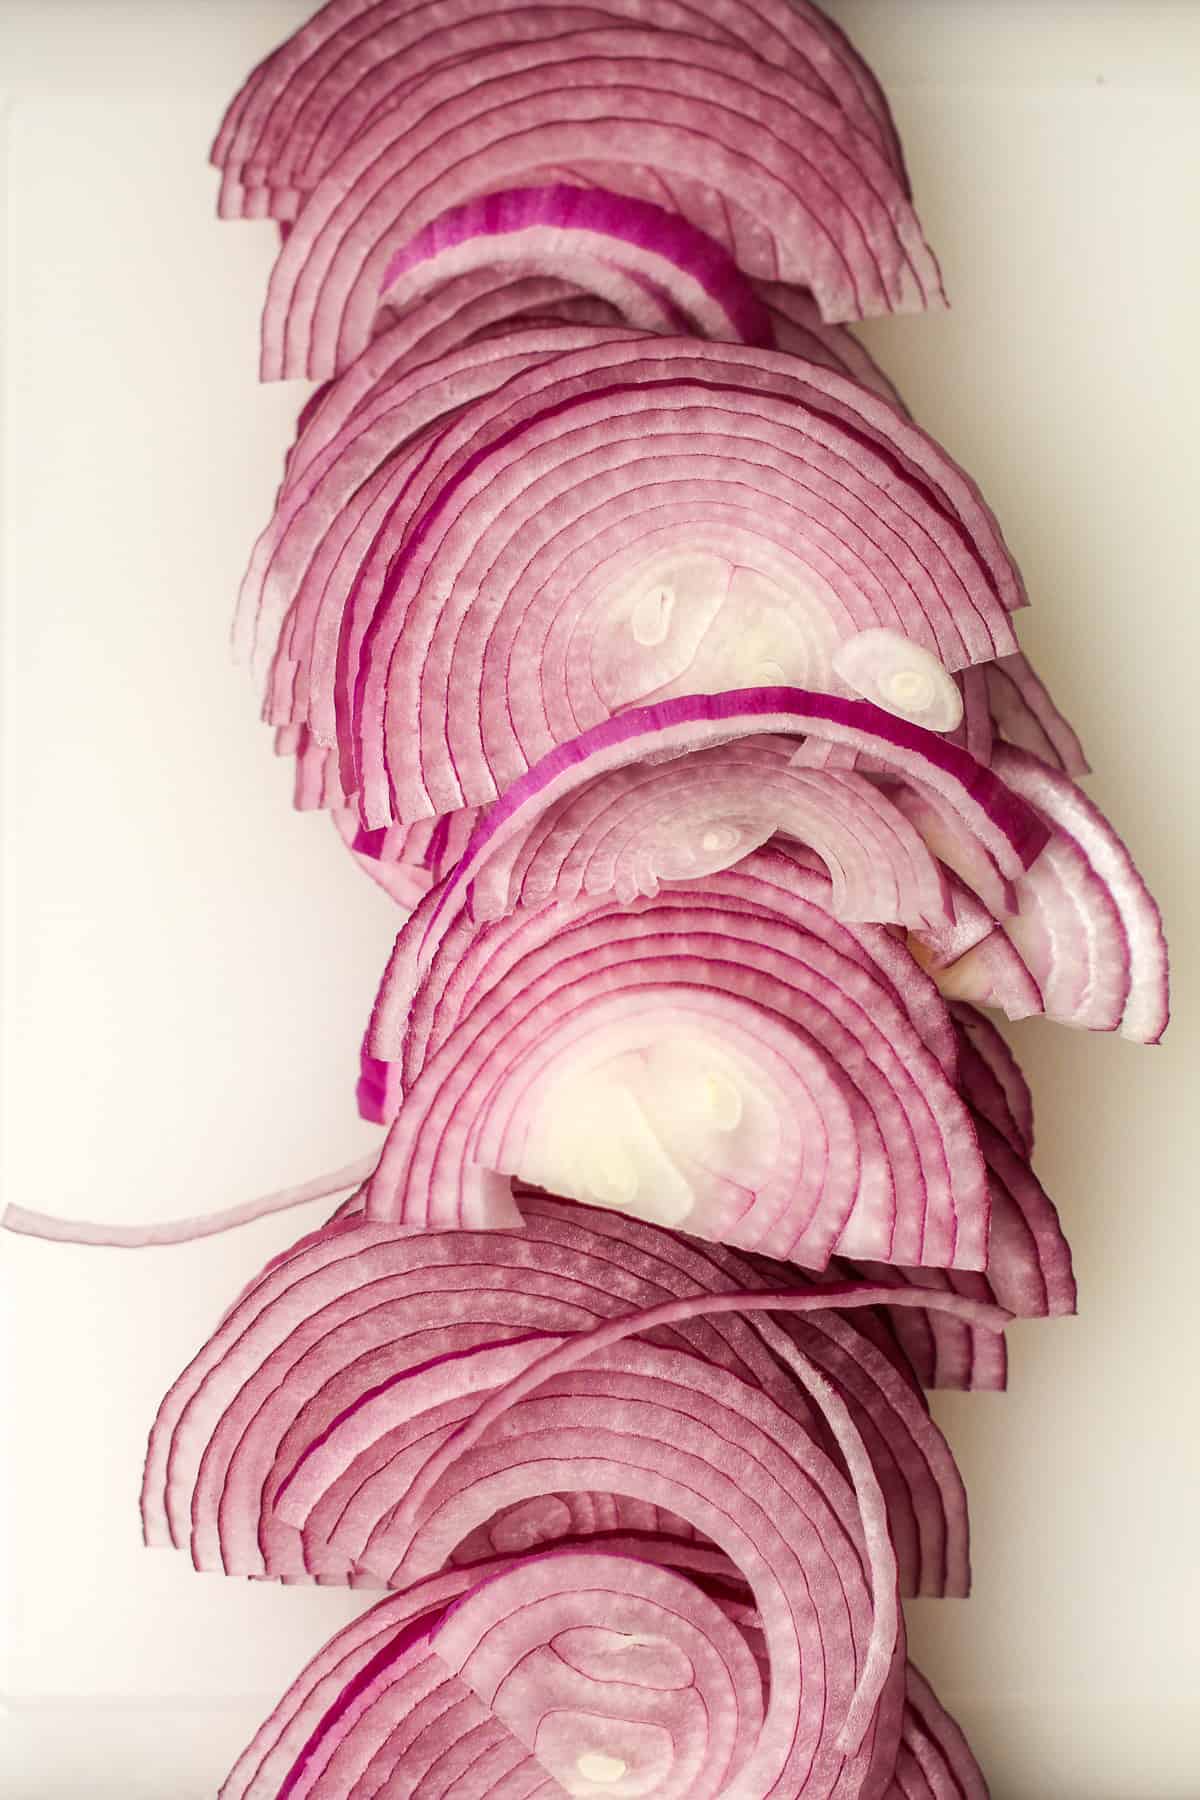 The thinly sliced red onion on a cutting board.